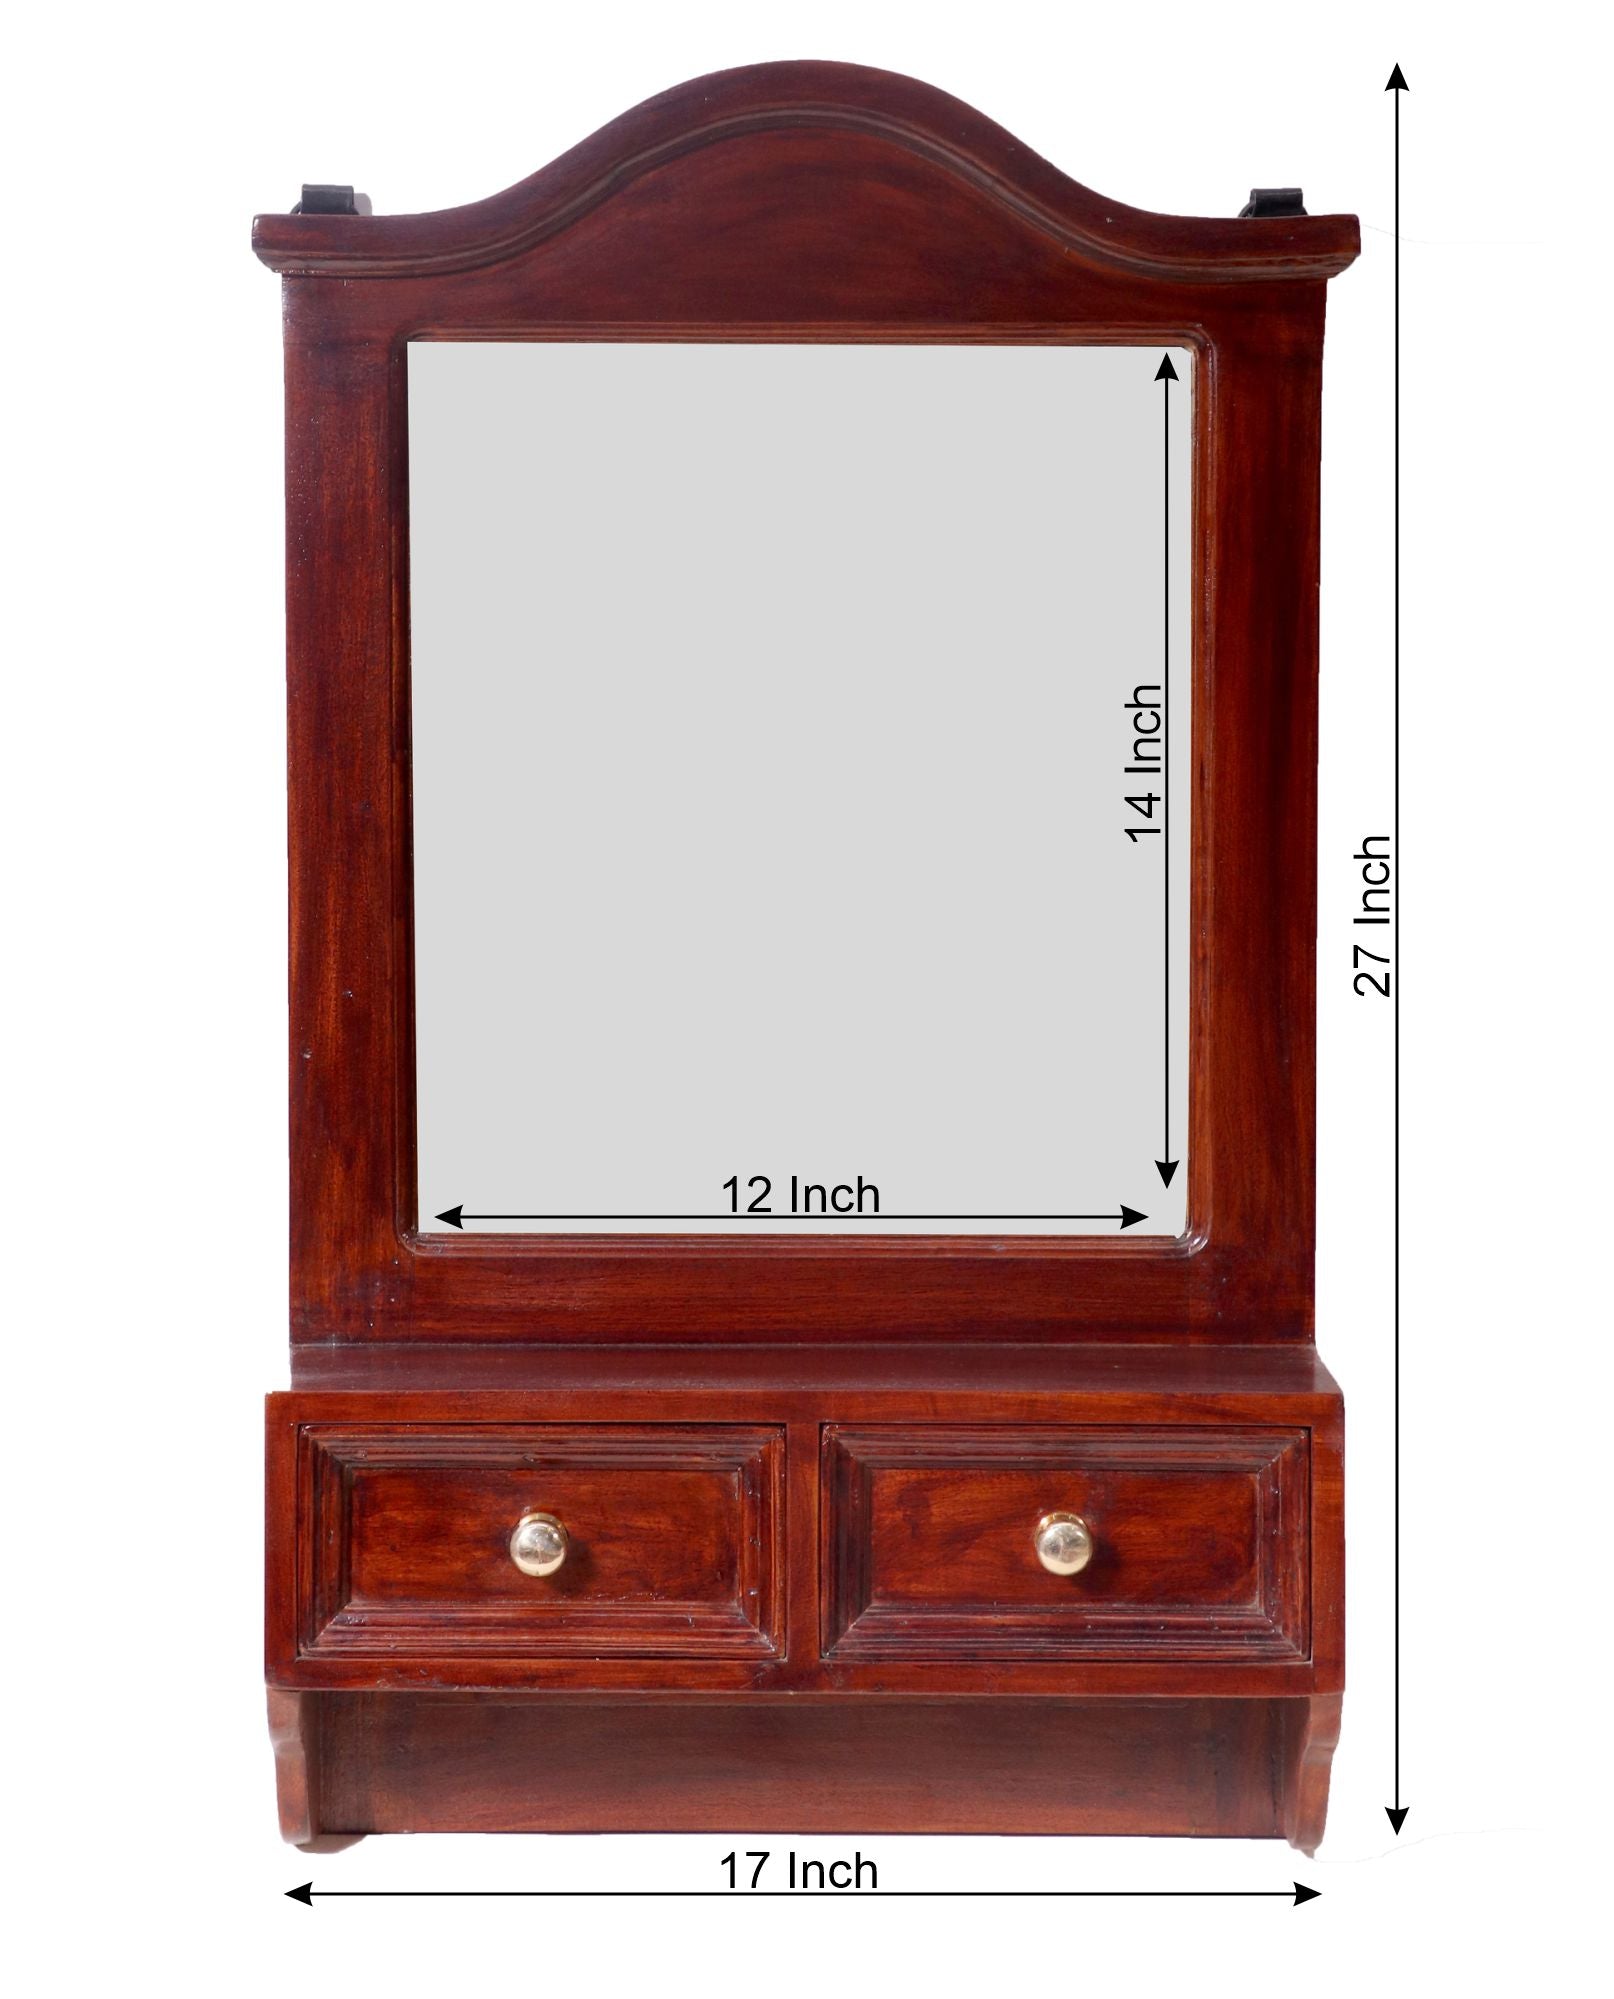 French arch style double drawer mirror frame Mirror